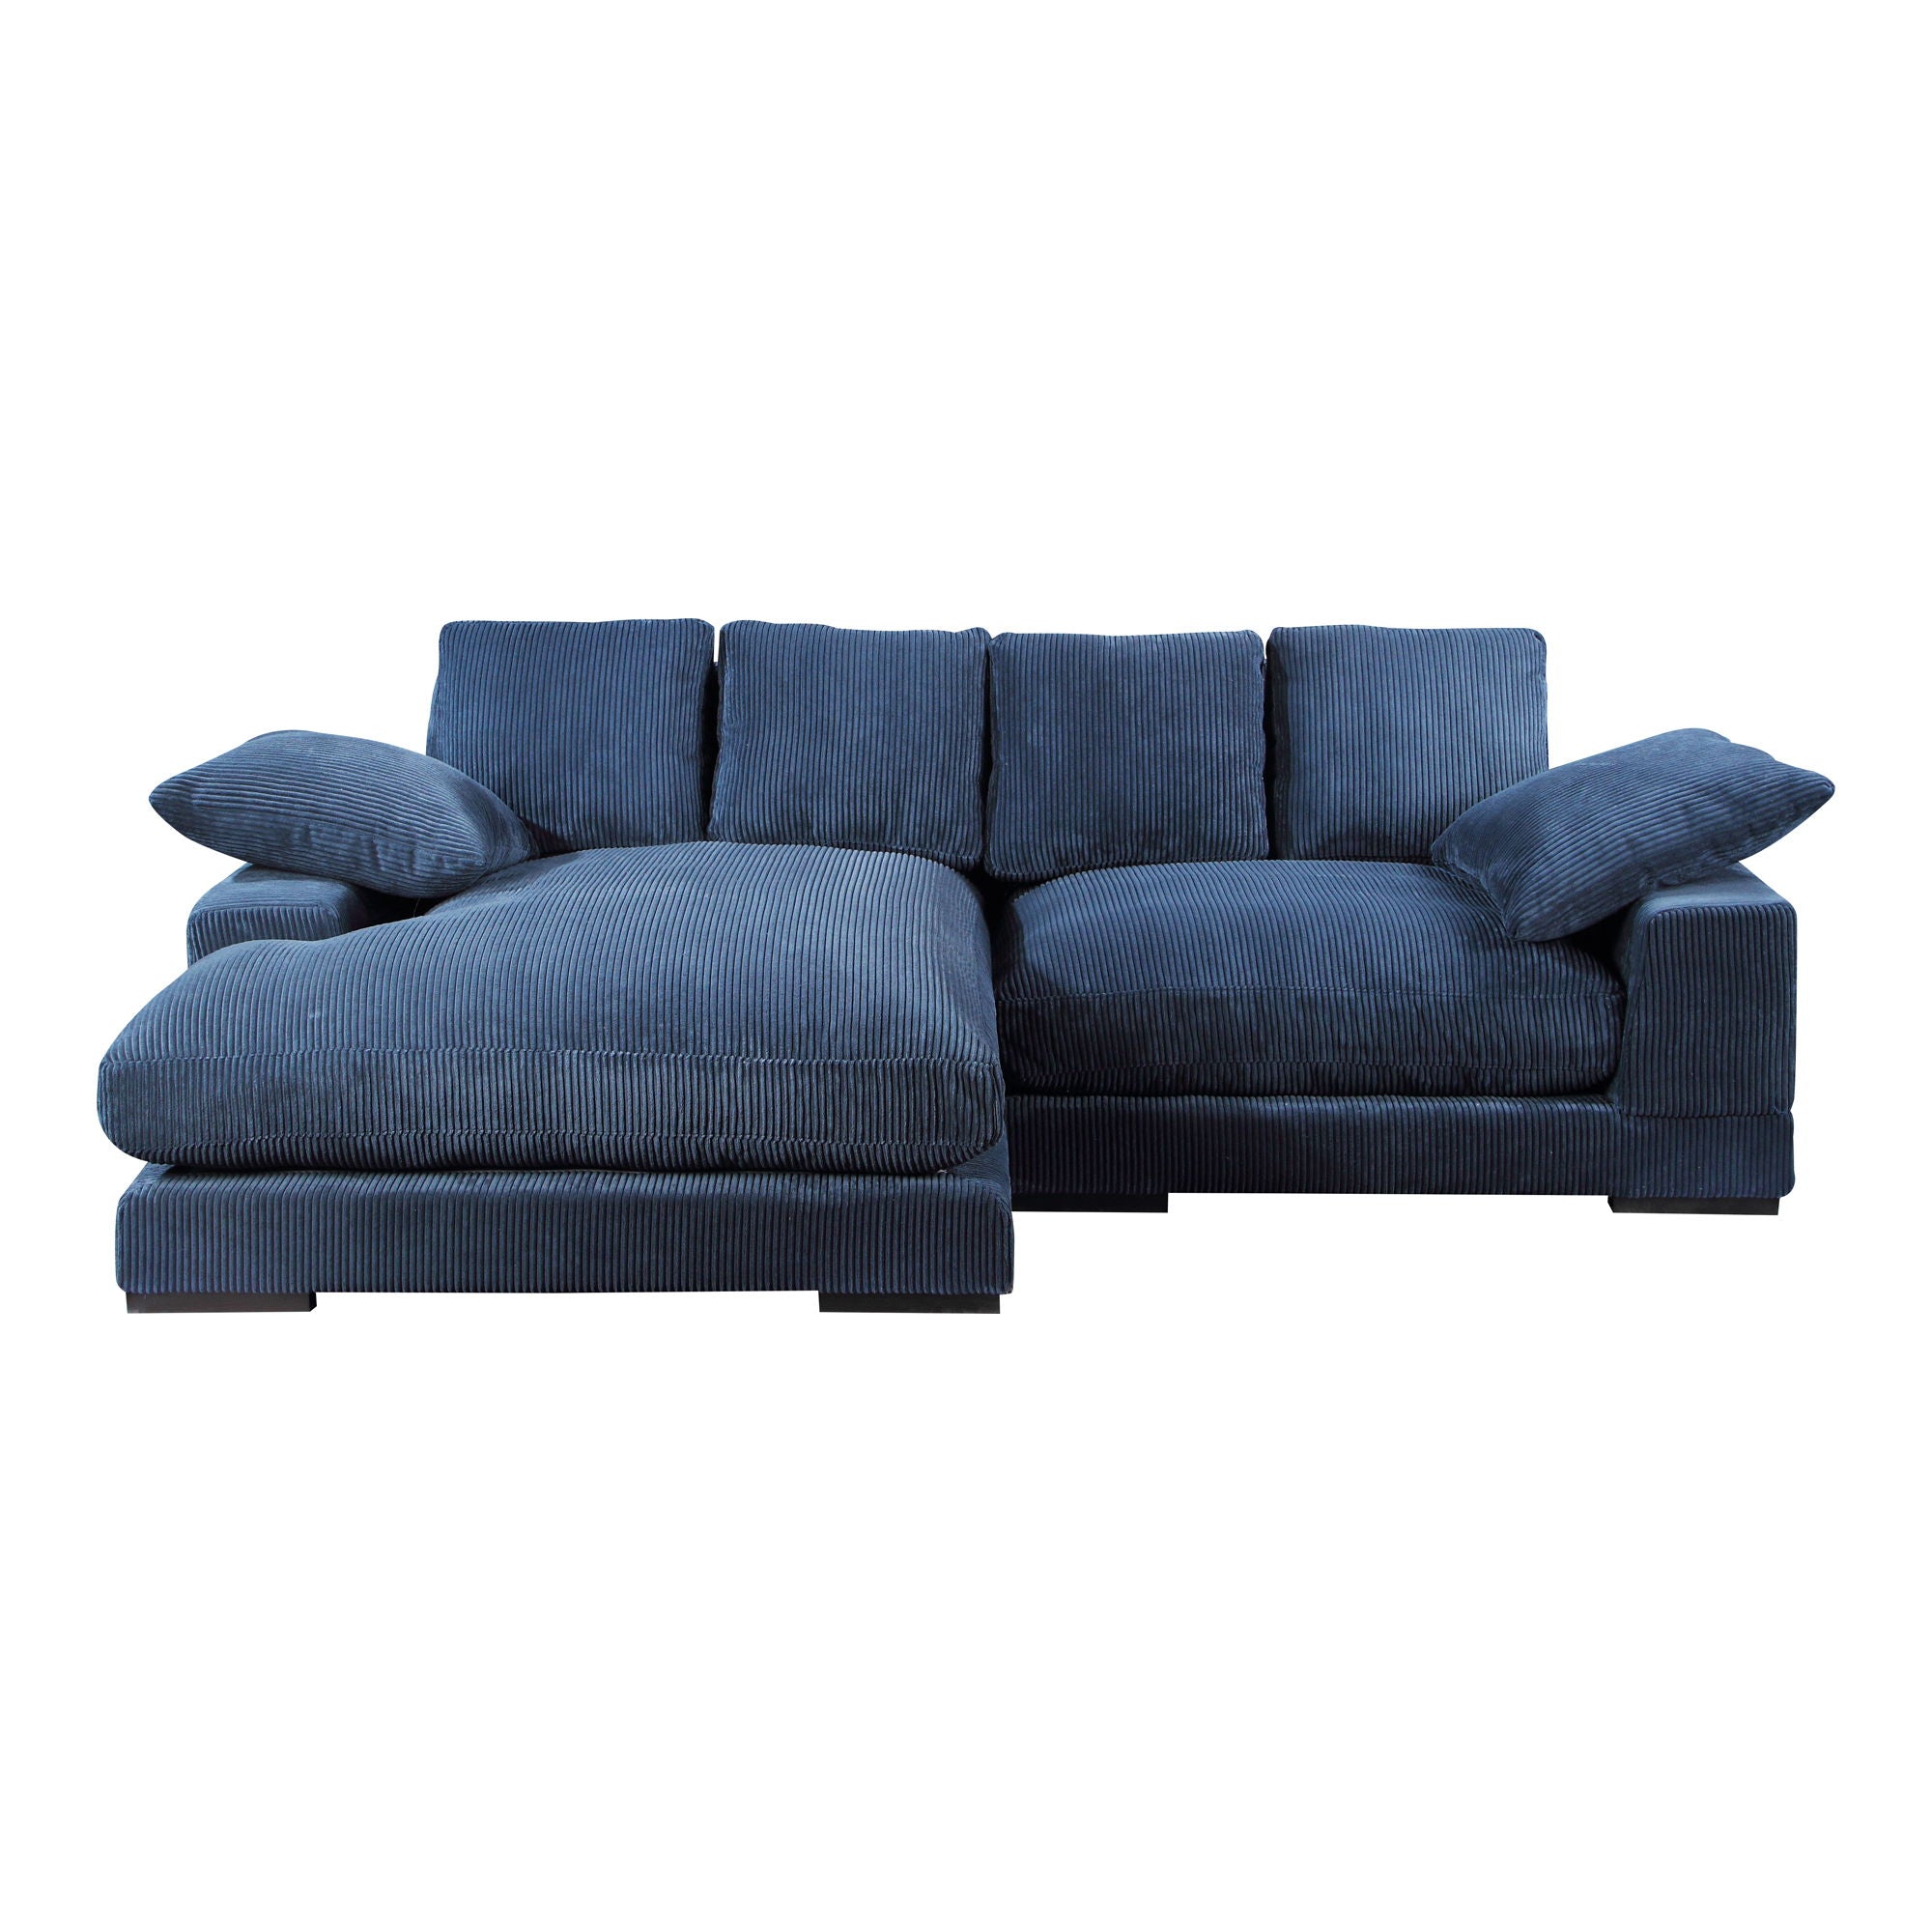 Cozy Blue Sectional Sofa - Luxe Comfort Plunge-Stationary Sectionals-American Furniture Outlet